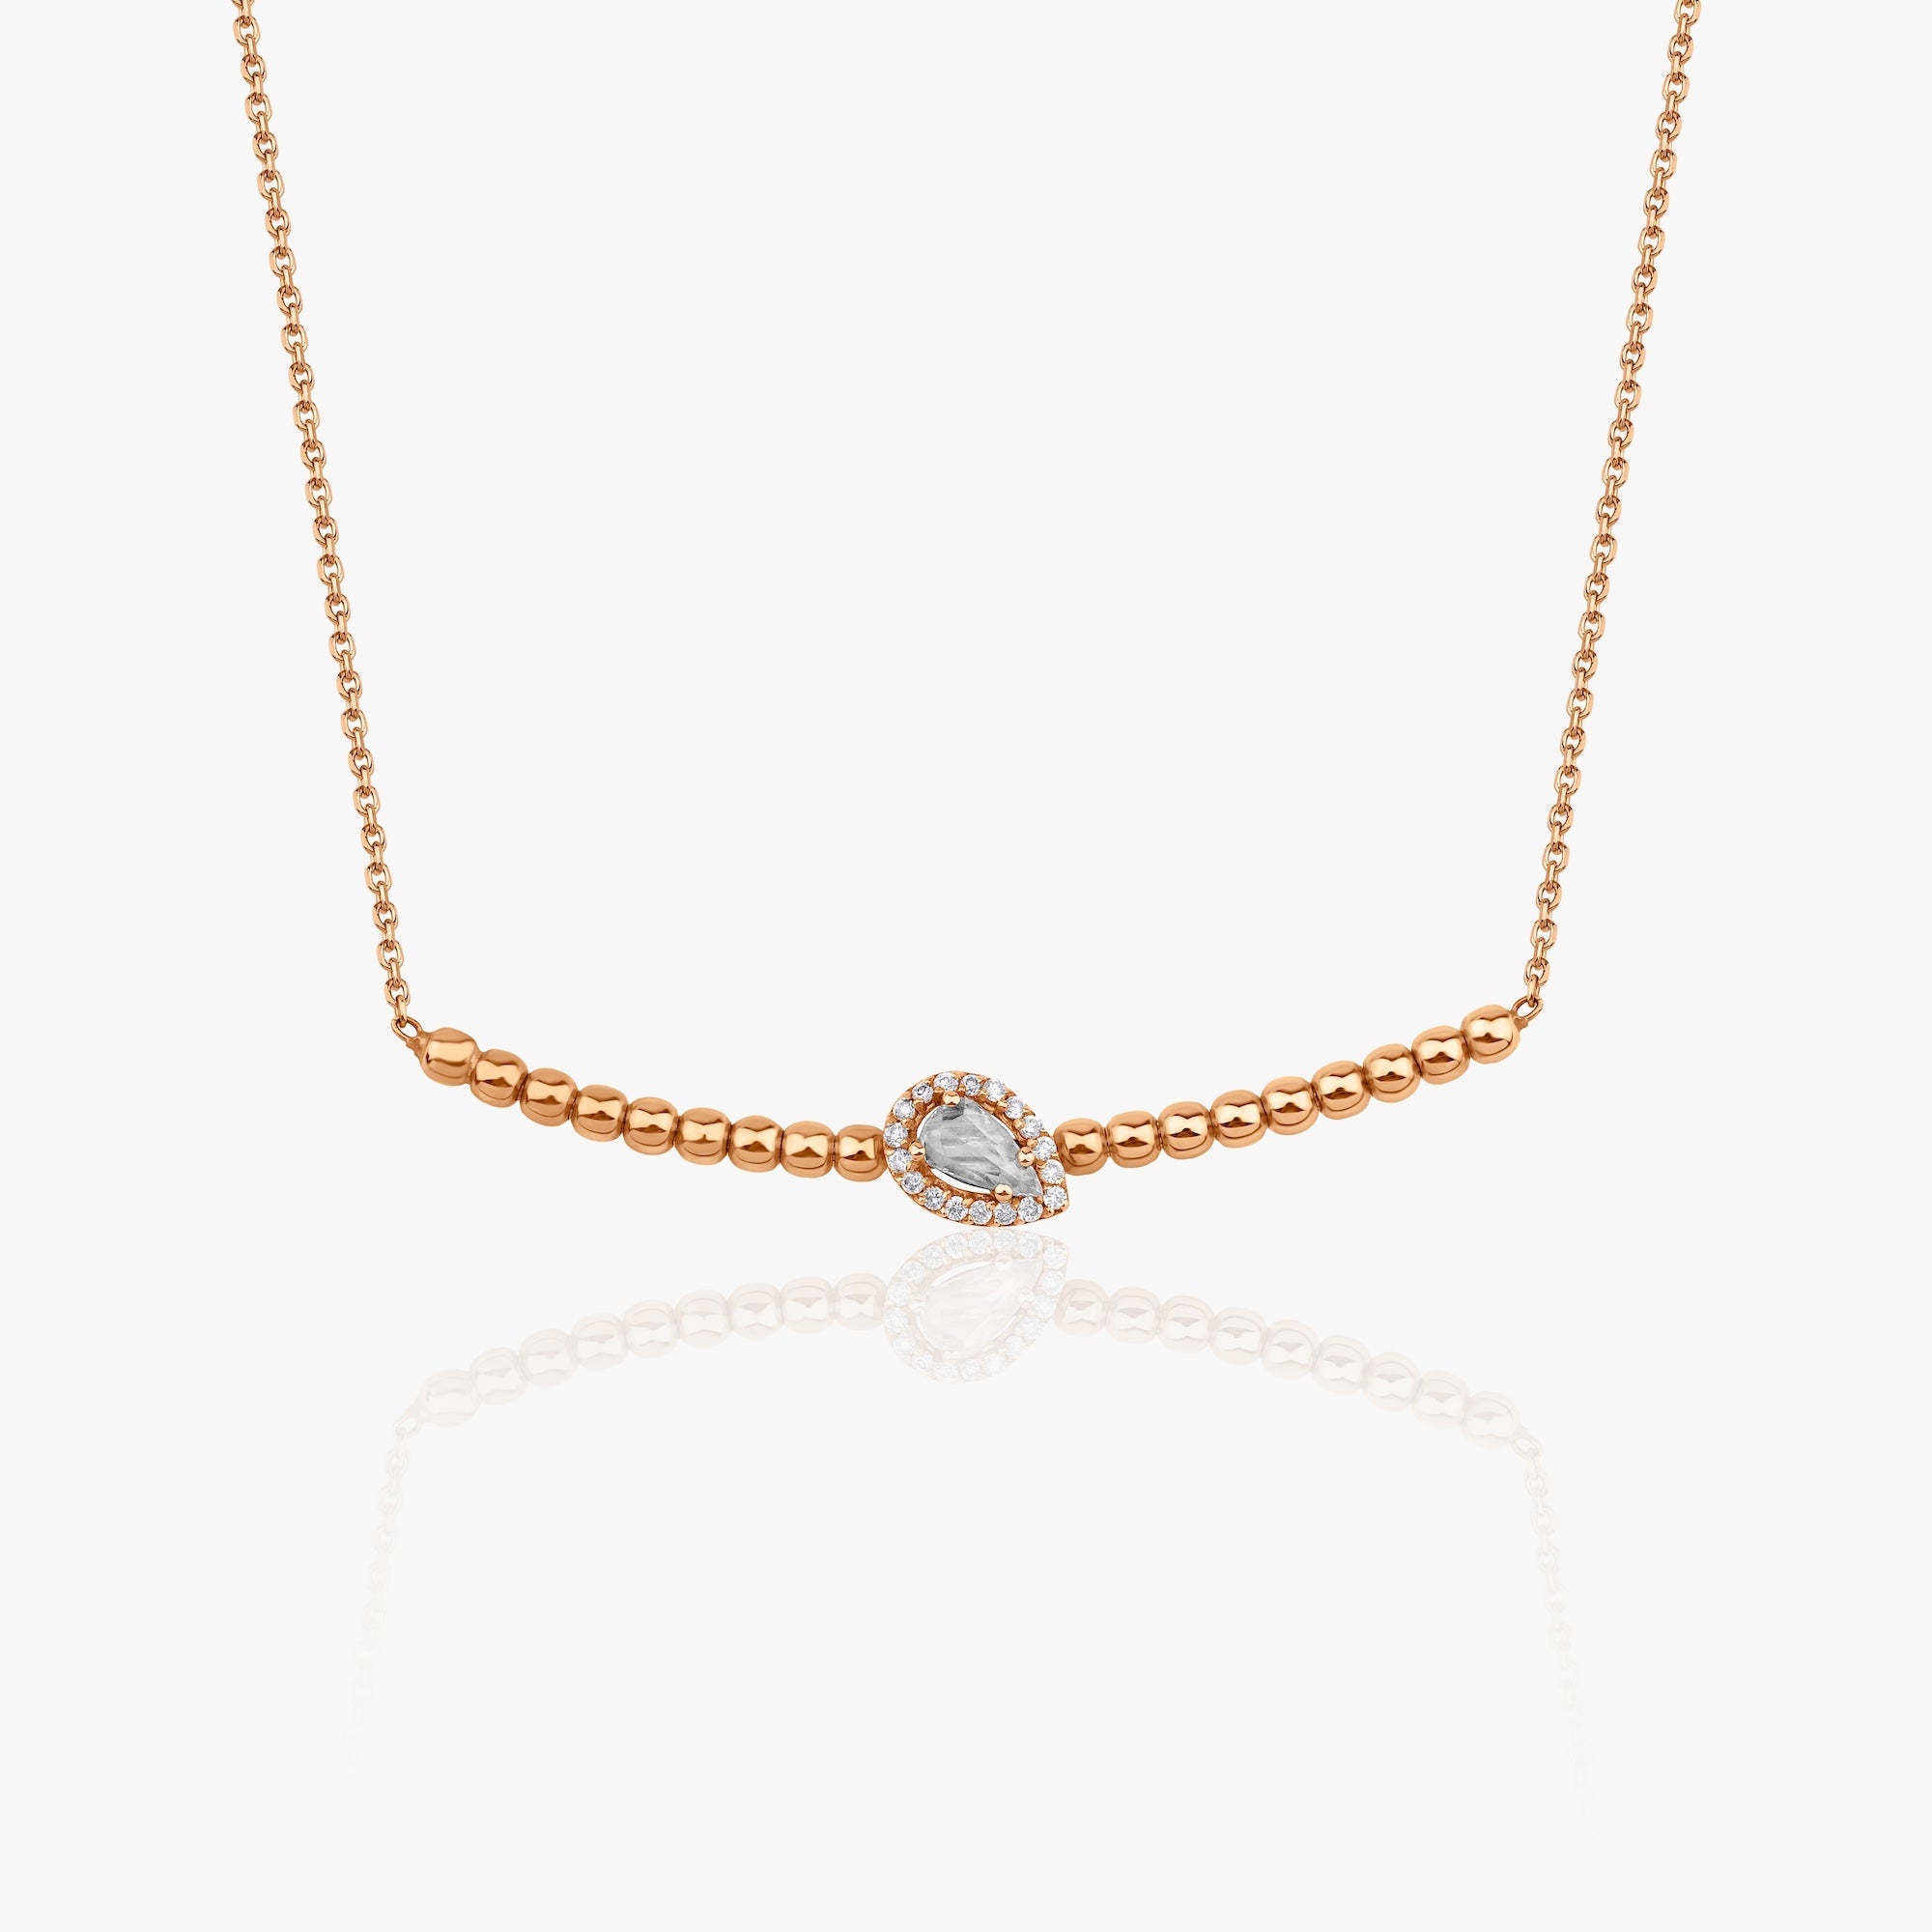 Diamond Curved Bar Necklace Available in 14K and 18K Gold